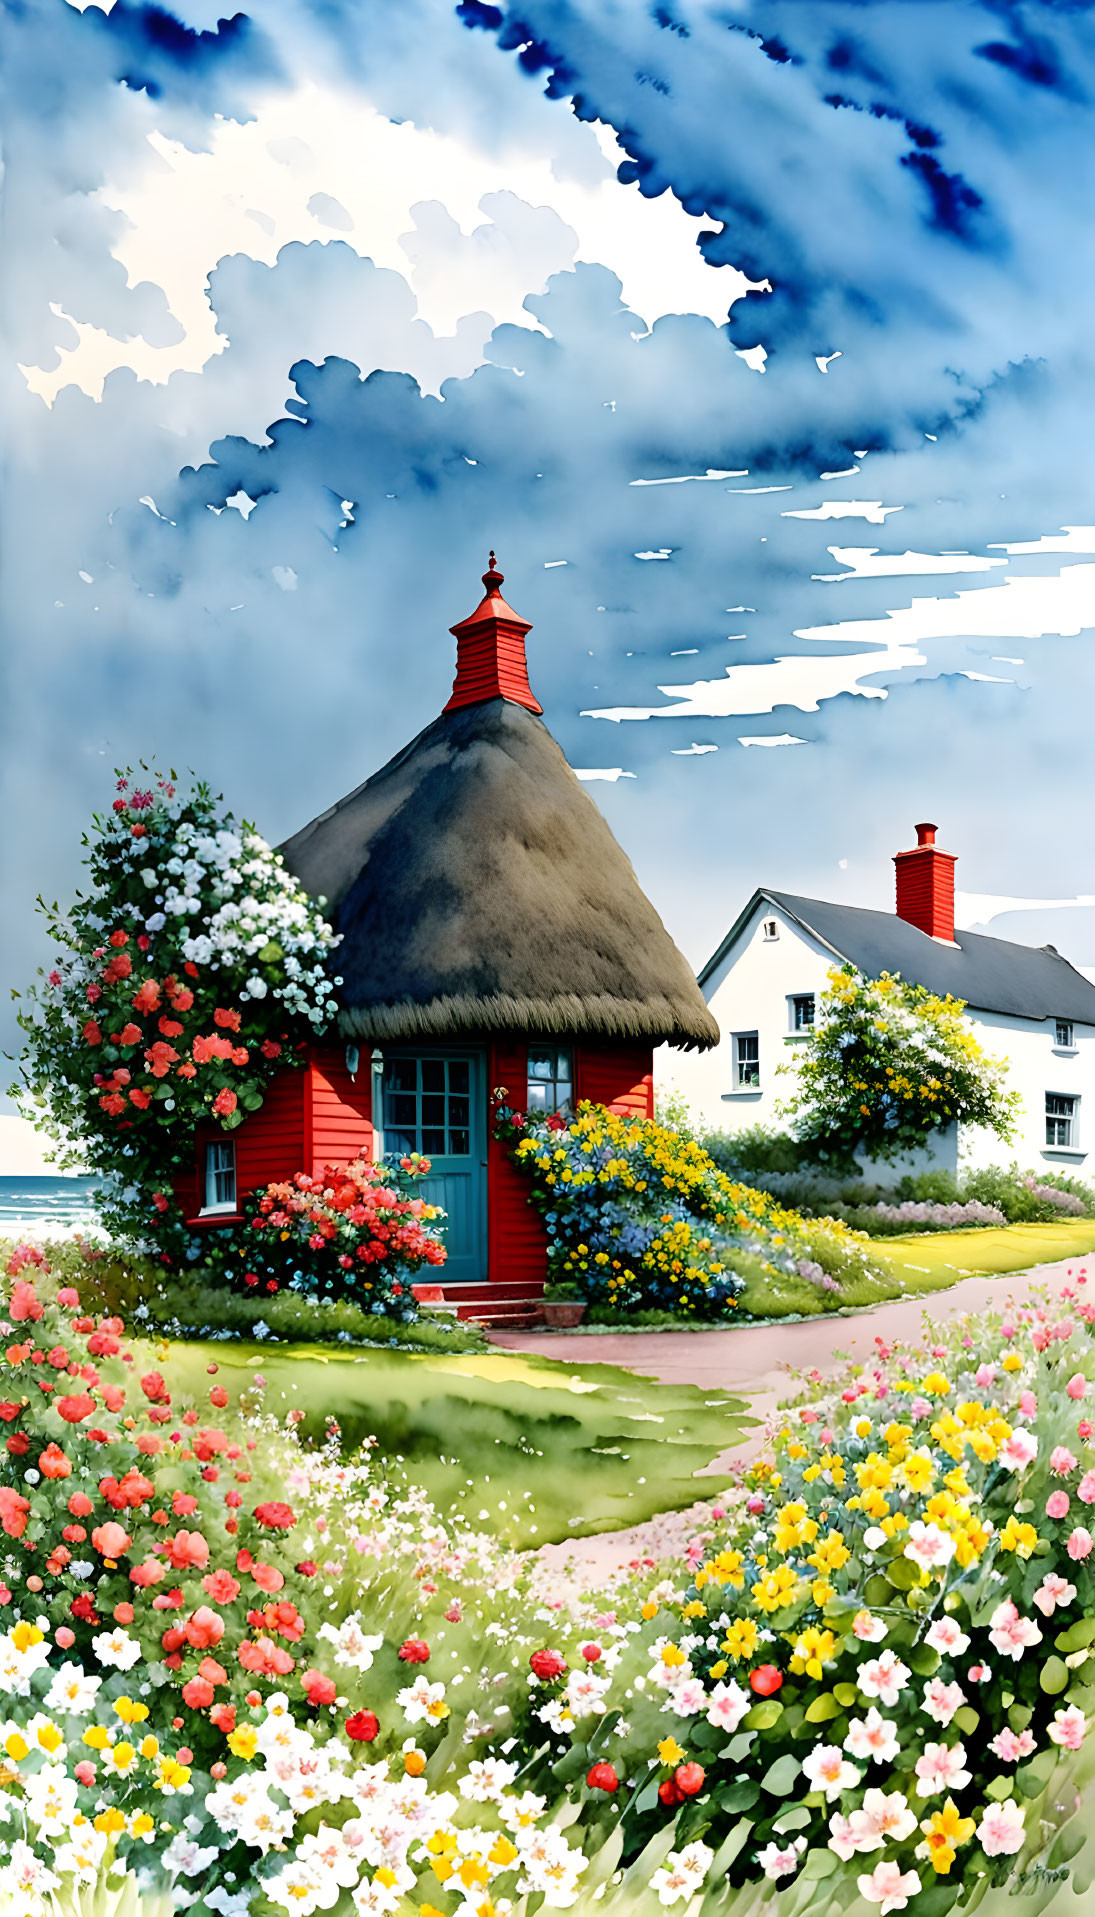 Red Thatched-Roof Cottage in Flower Garden Setting